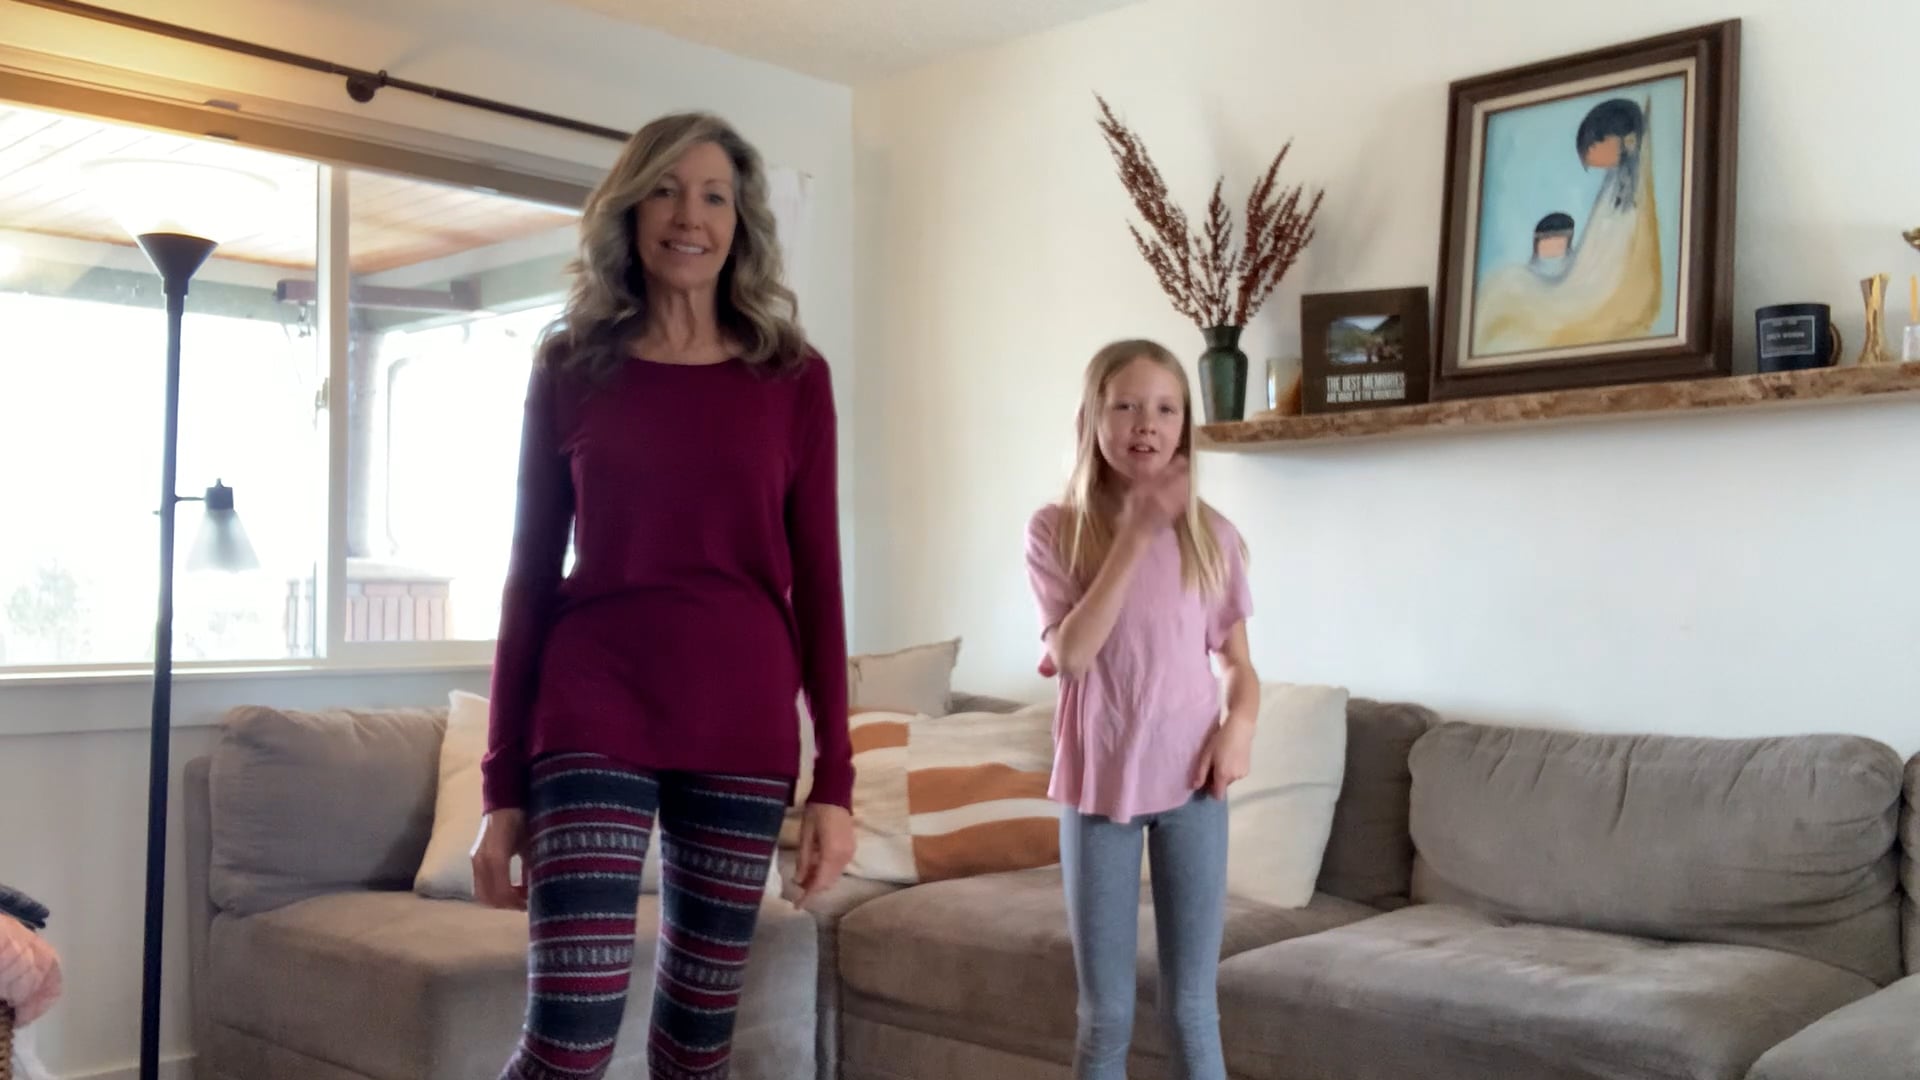 Jeanne's Video for the kids January 9, 2022